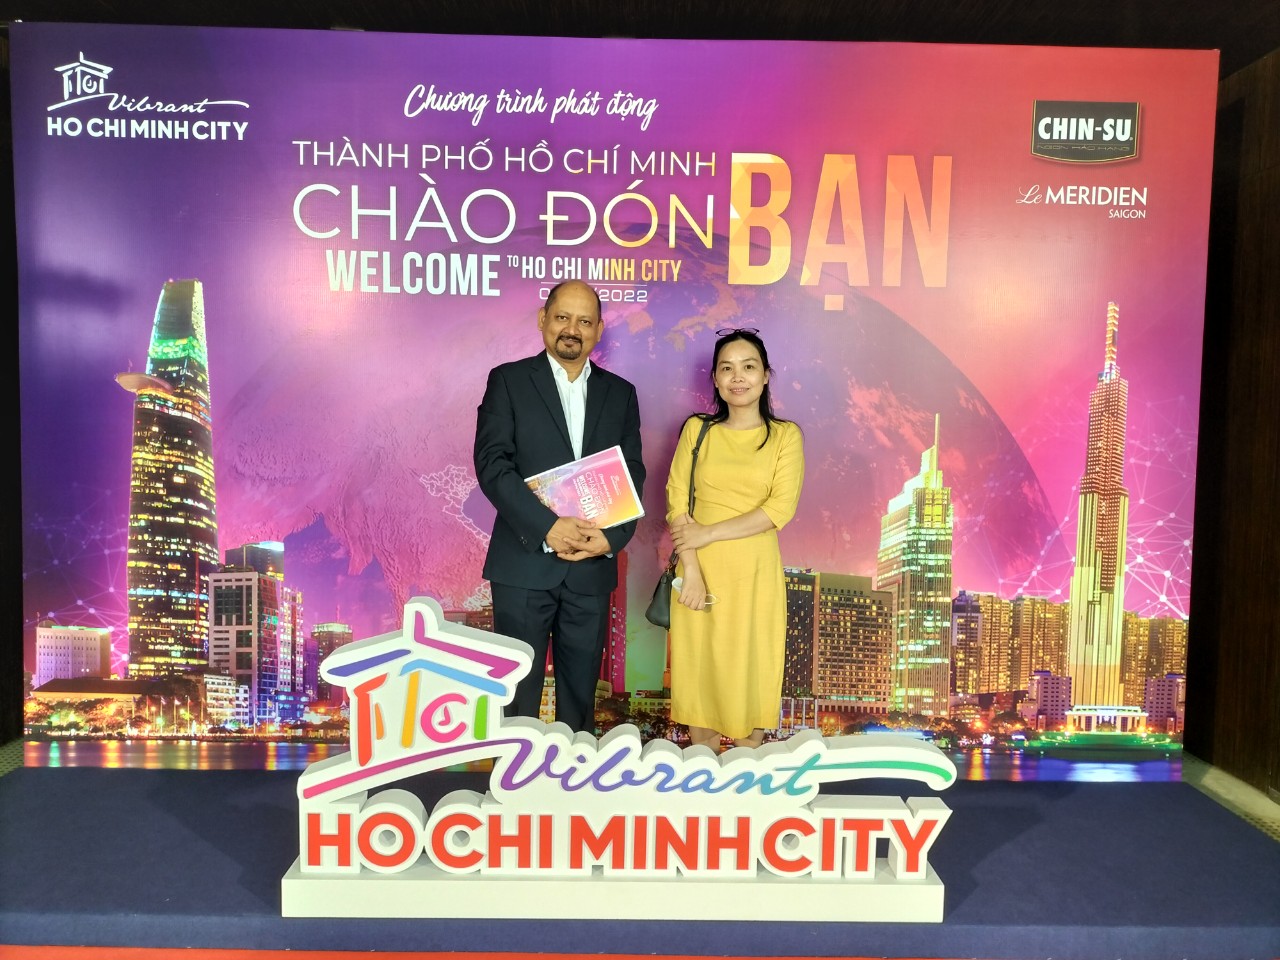 Welcome to Ho Chi Minh City